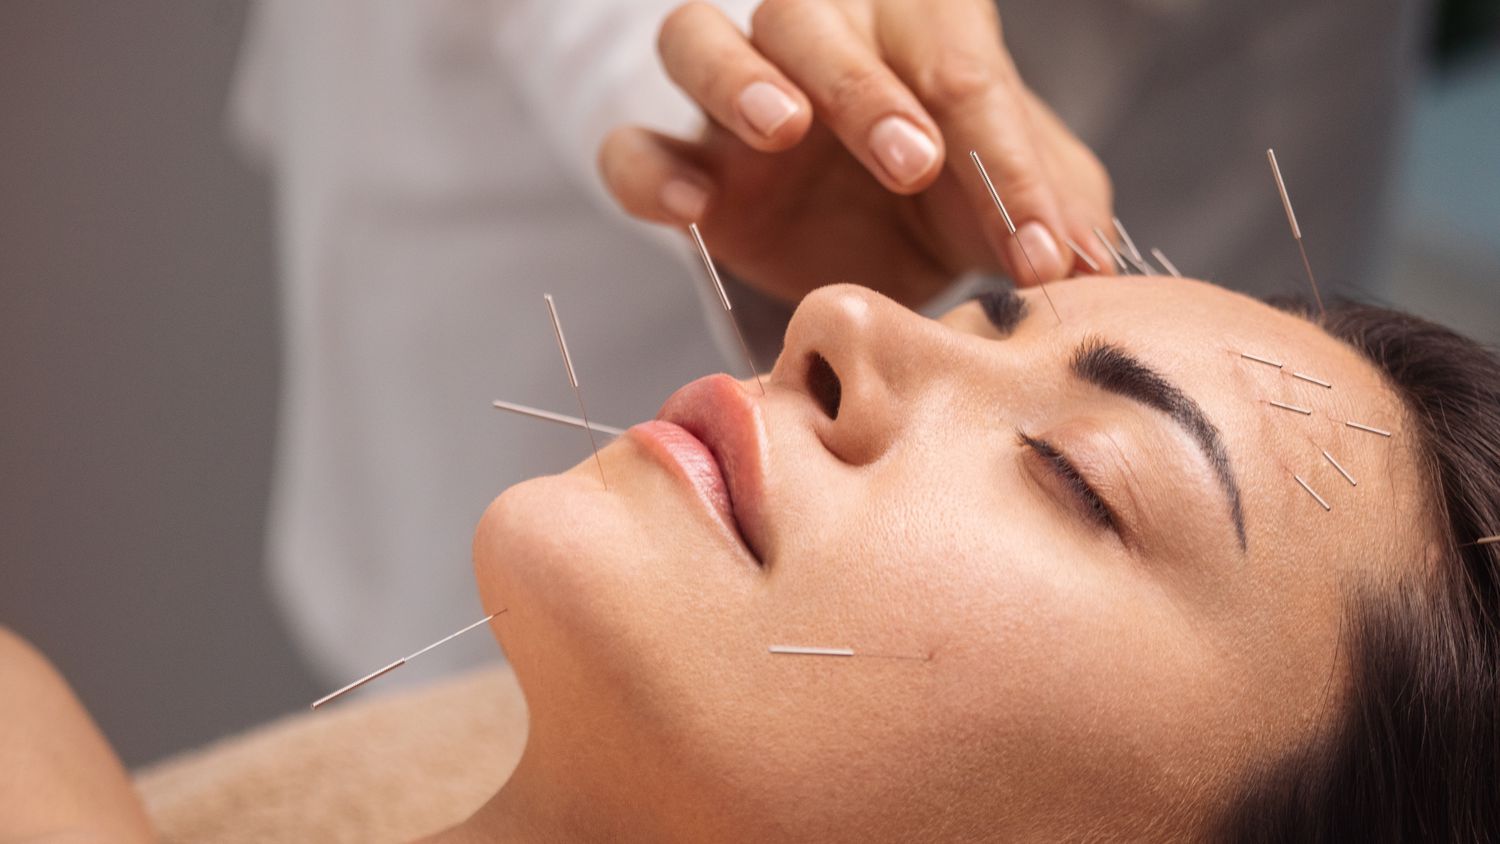 5 Benefits of Acupuncture You Never Knew About